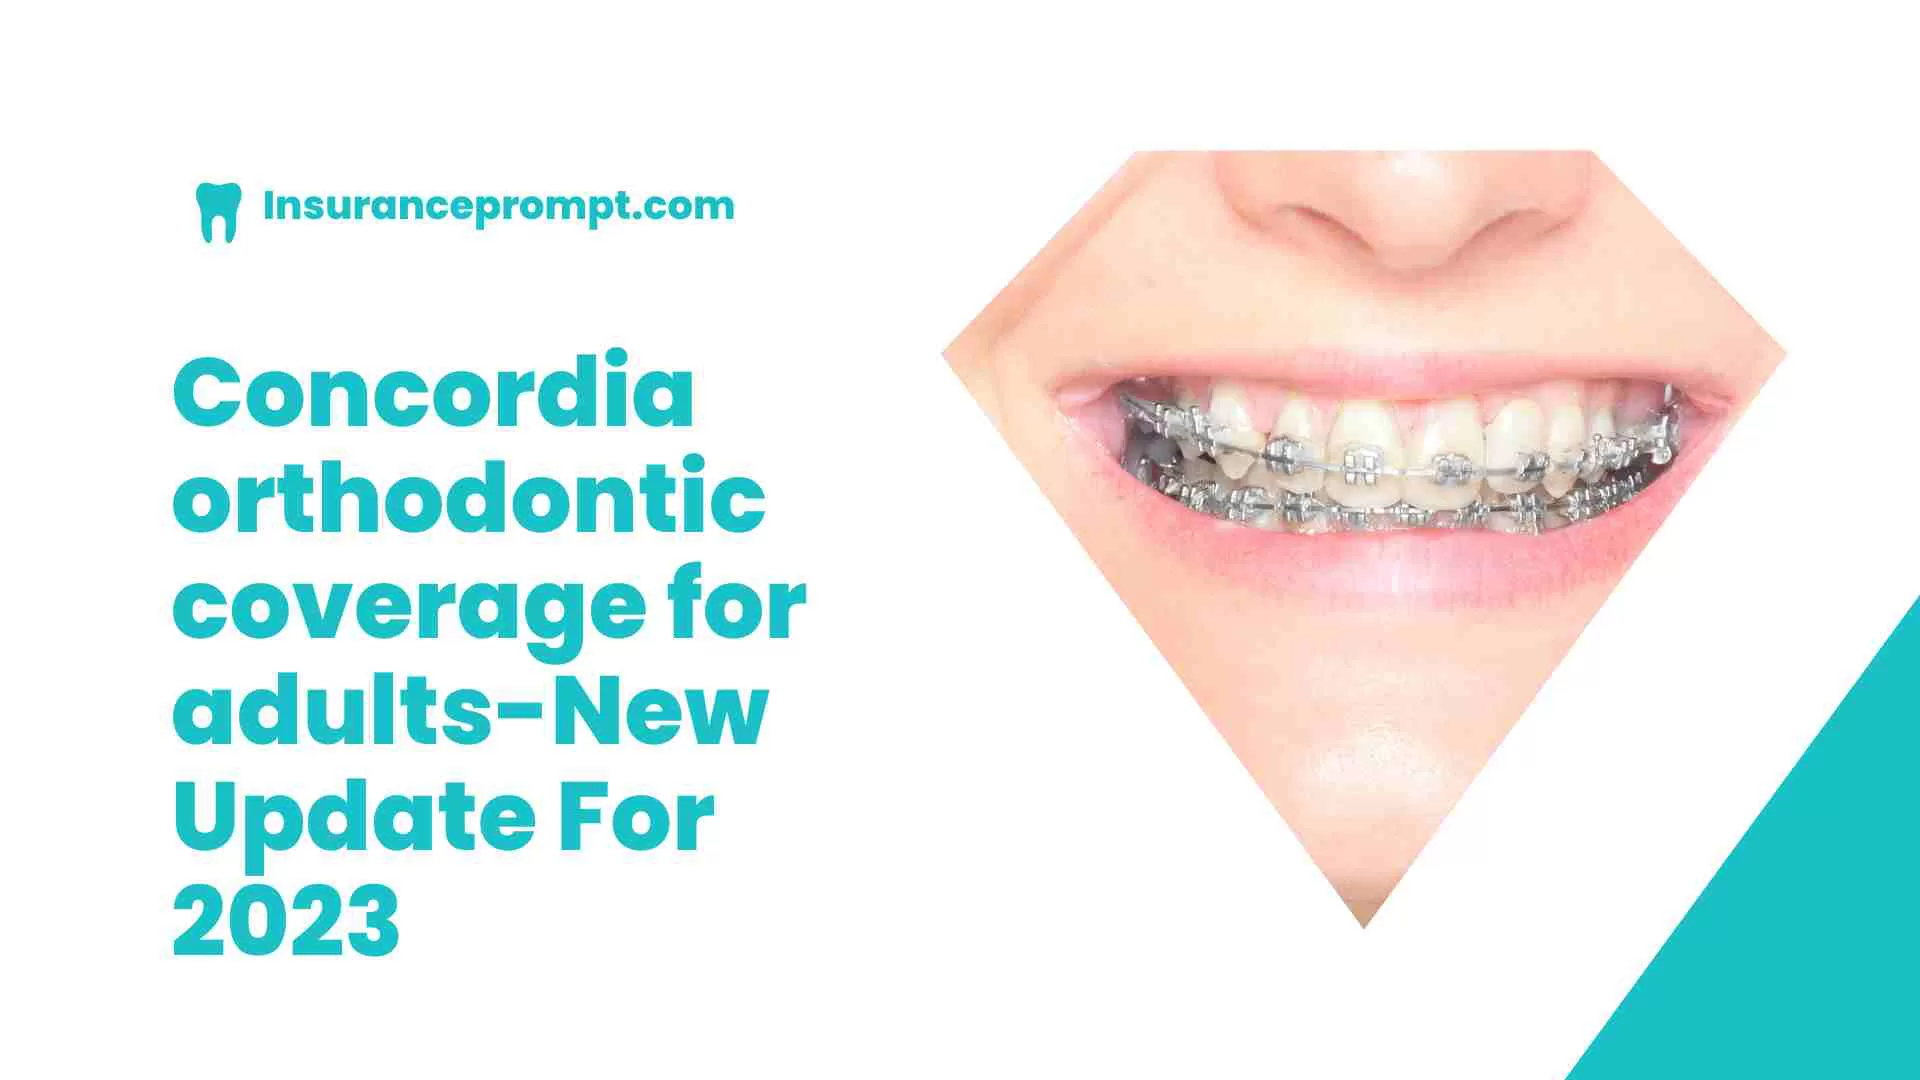 Concordia orthodontic coverage for adults